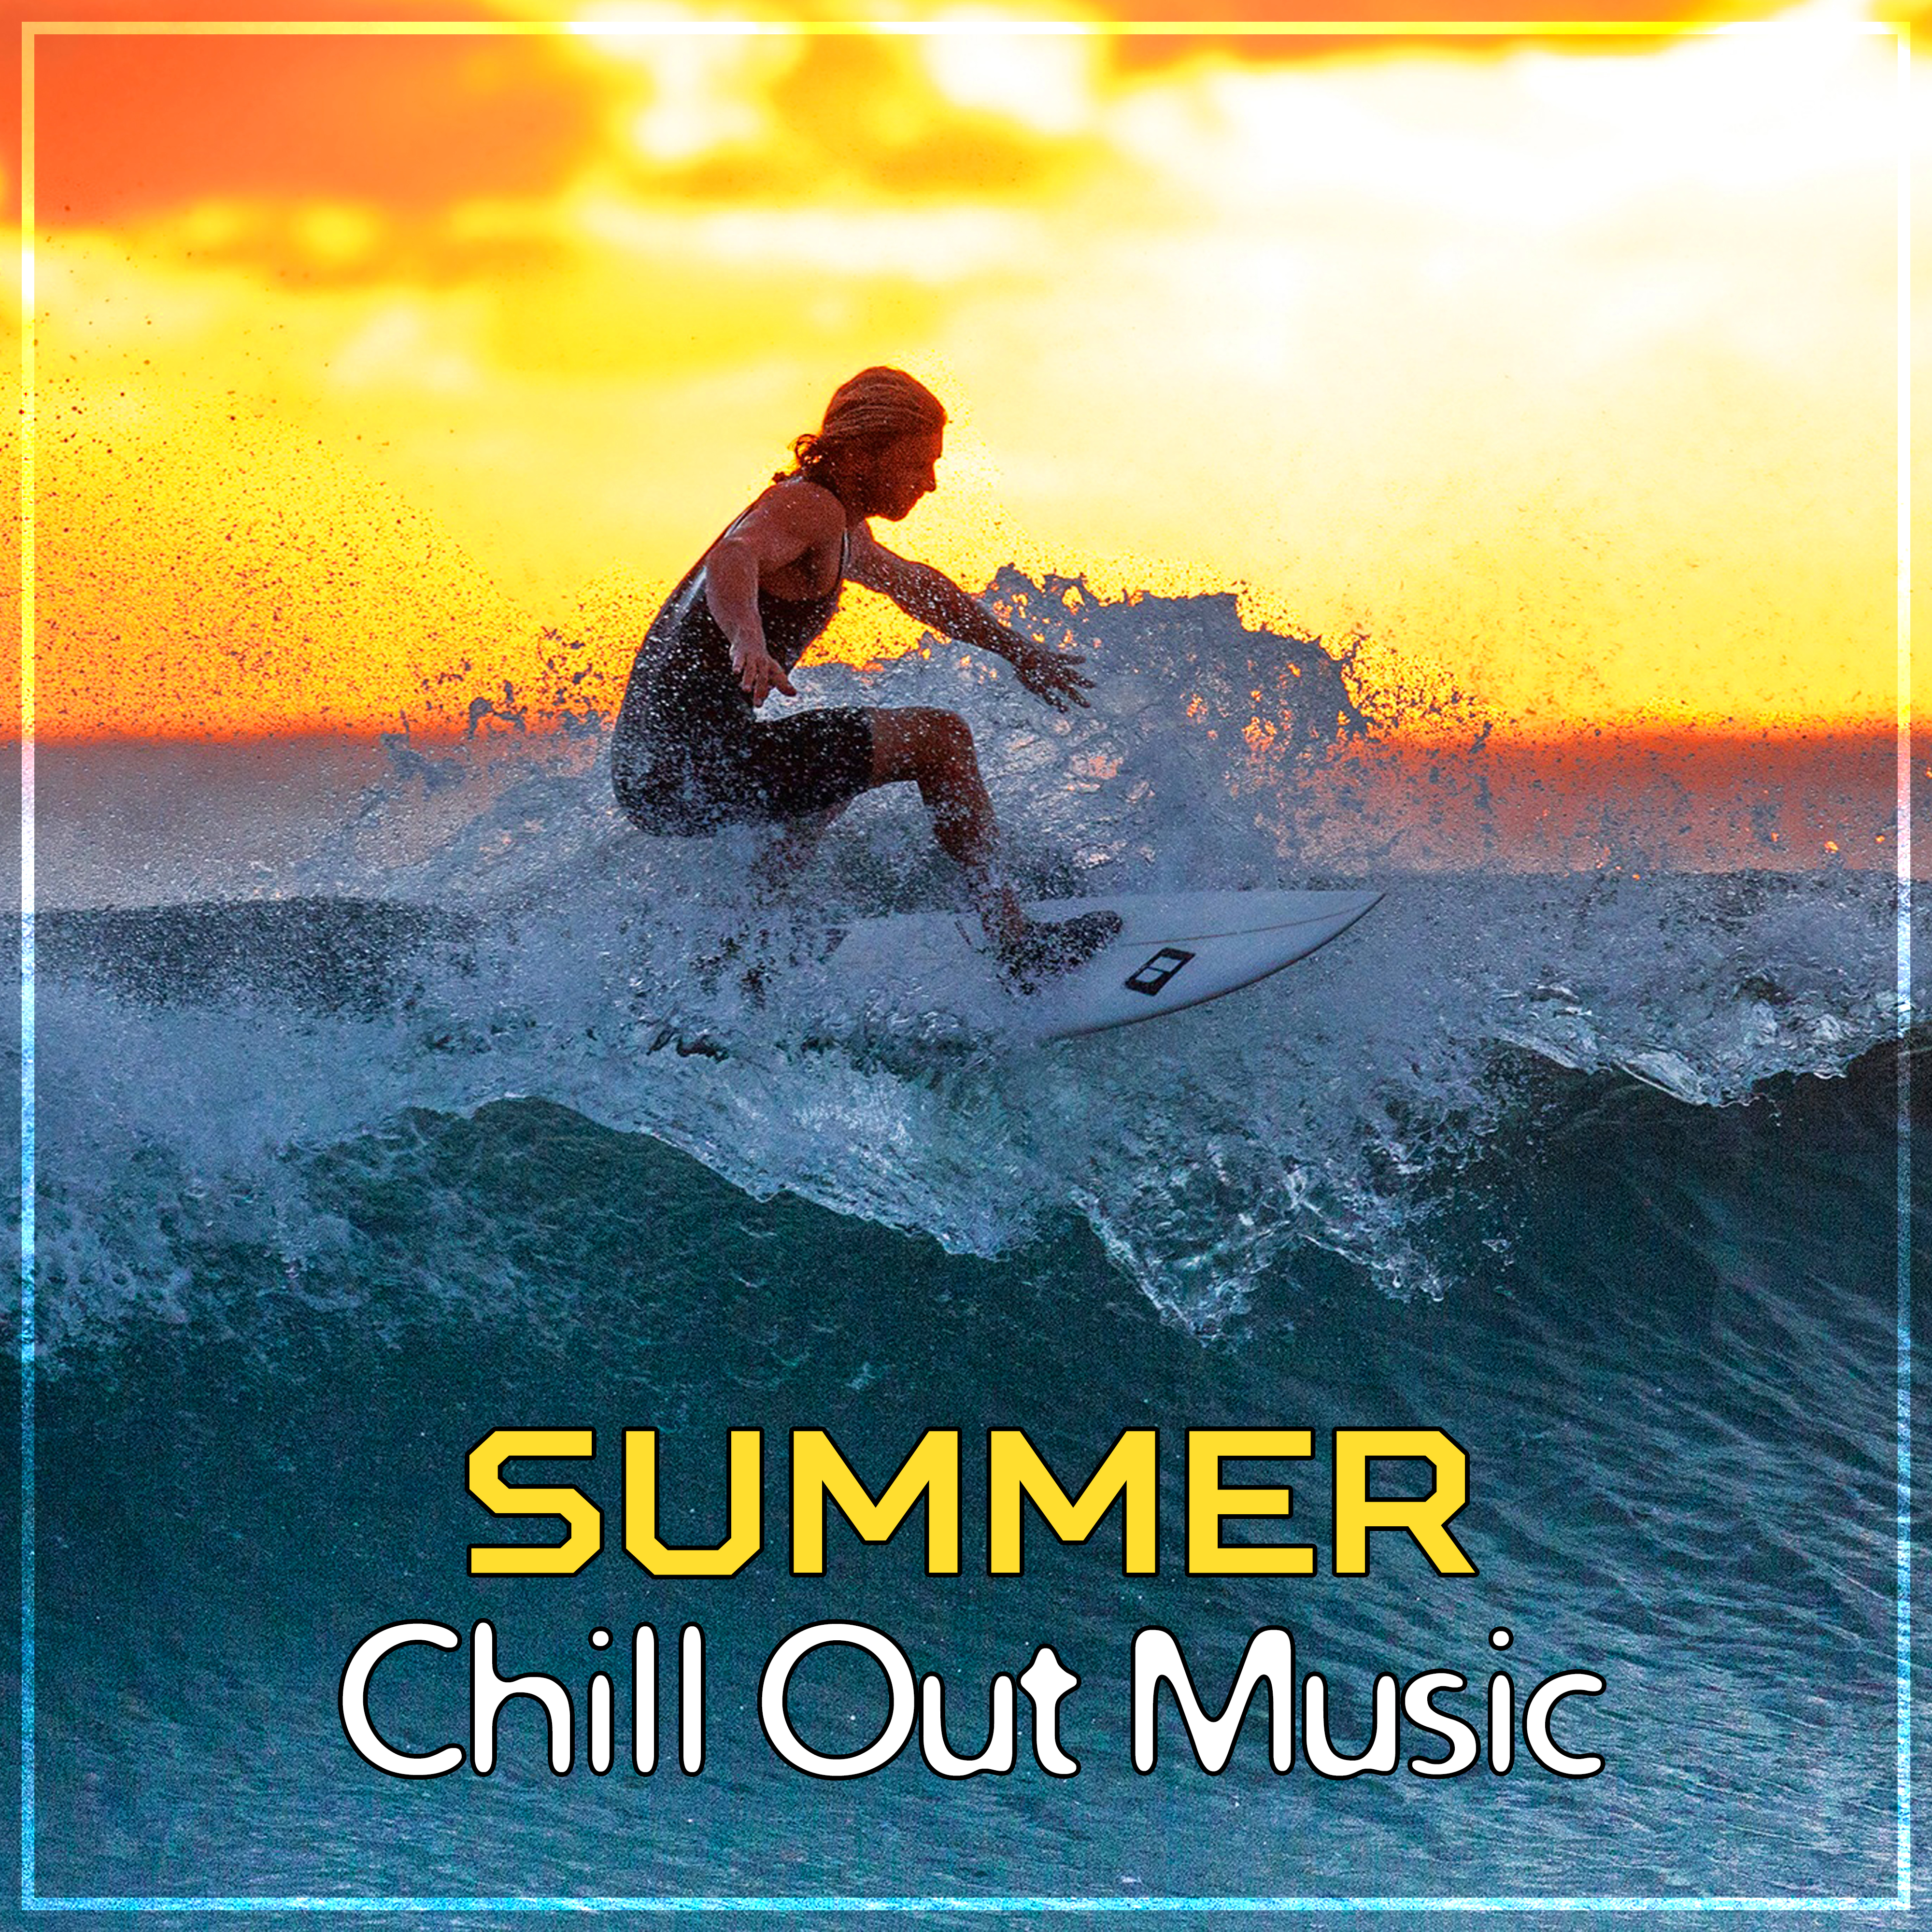 Summer Chill Out Music – Best Chill Out Sounds, Relaxing Vibes, Tropical Island, Soft Music